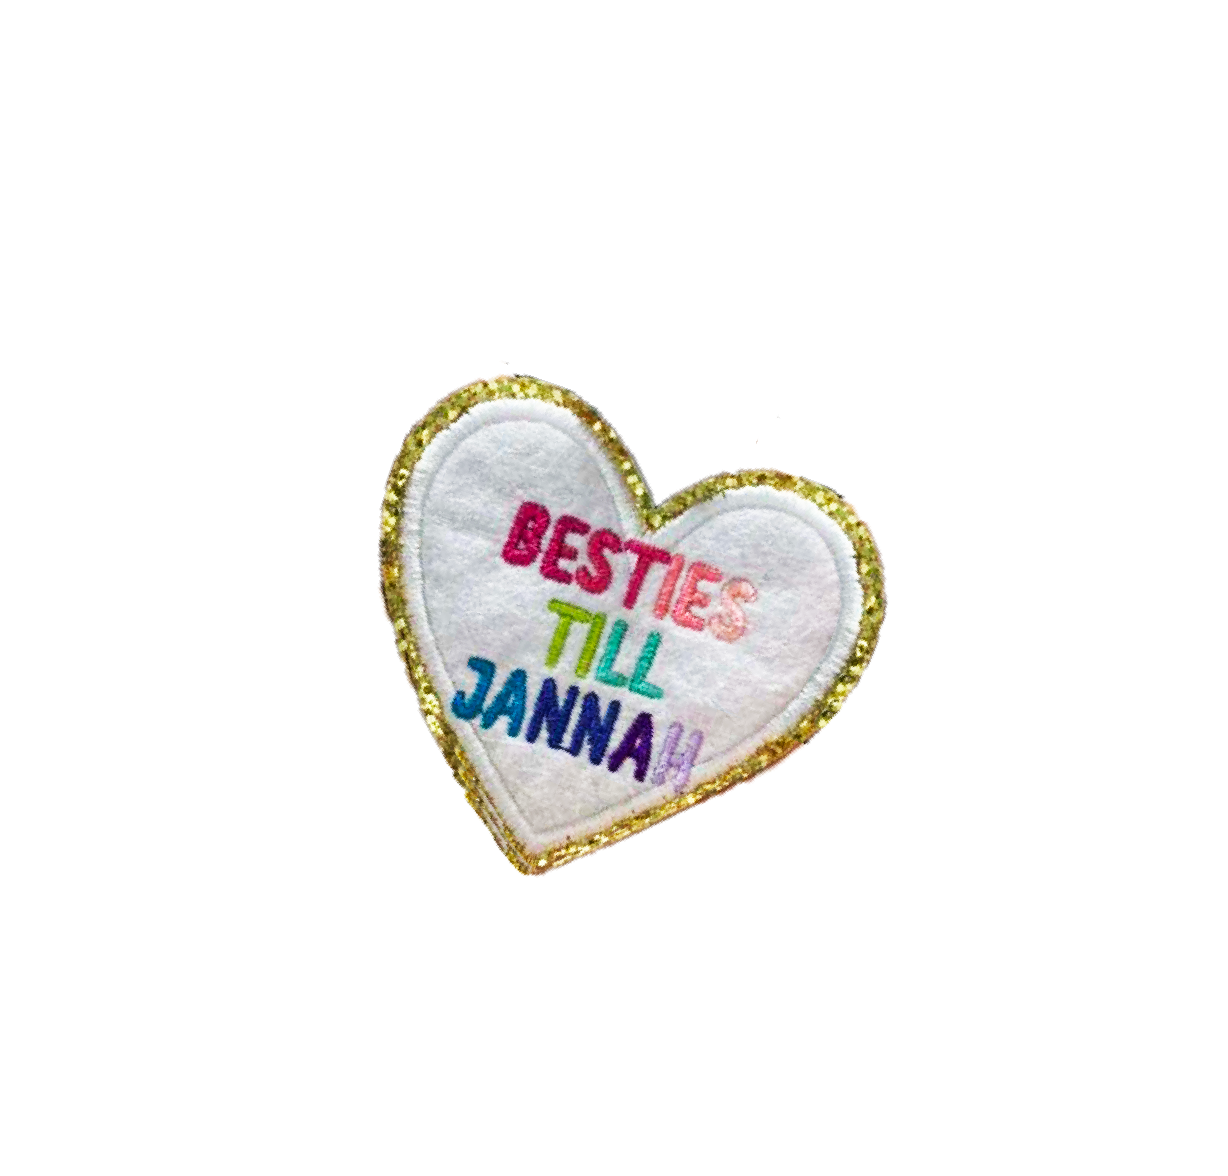 "Besties Til Jannah" Embroidered  Iron-on-Patch